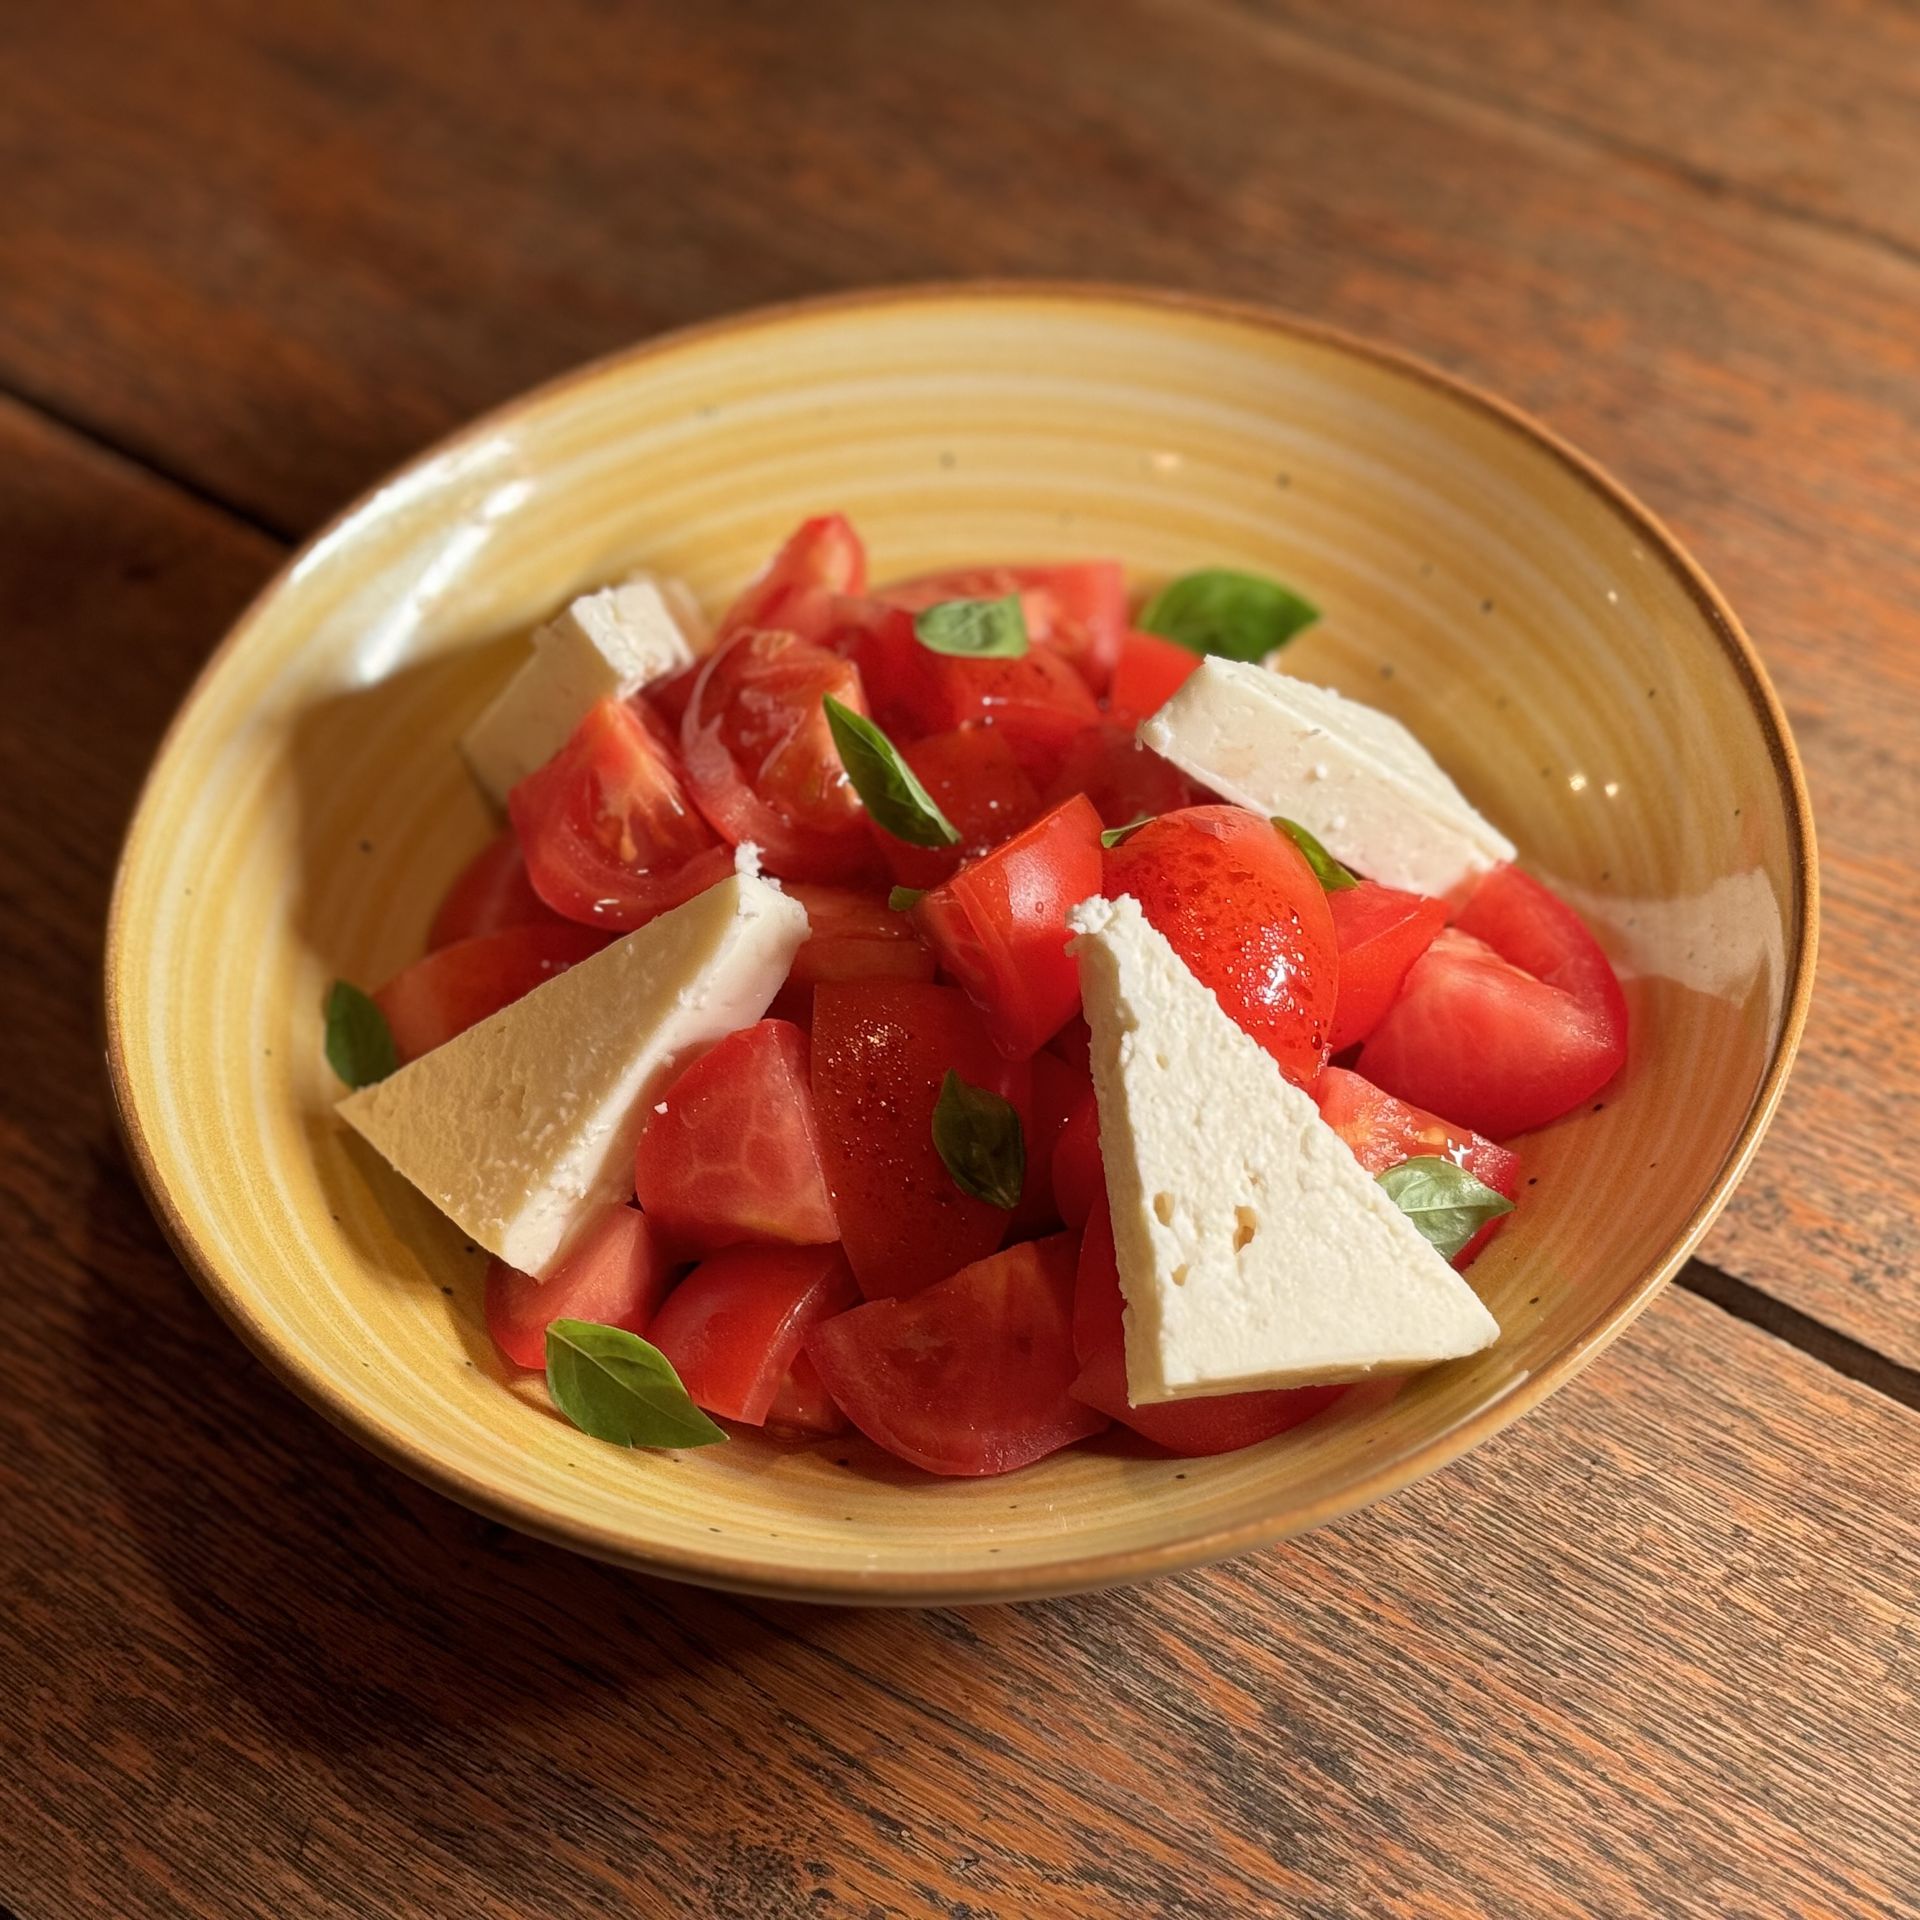 Tomato salad with cheese - 400 g